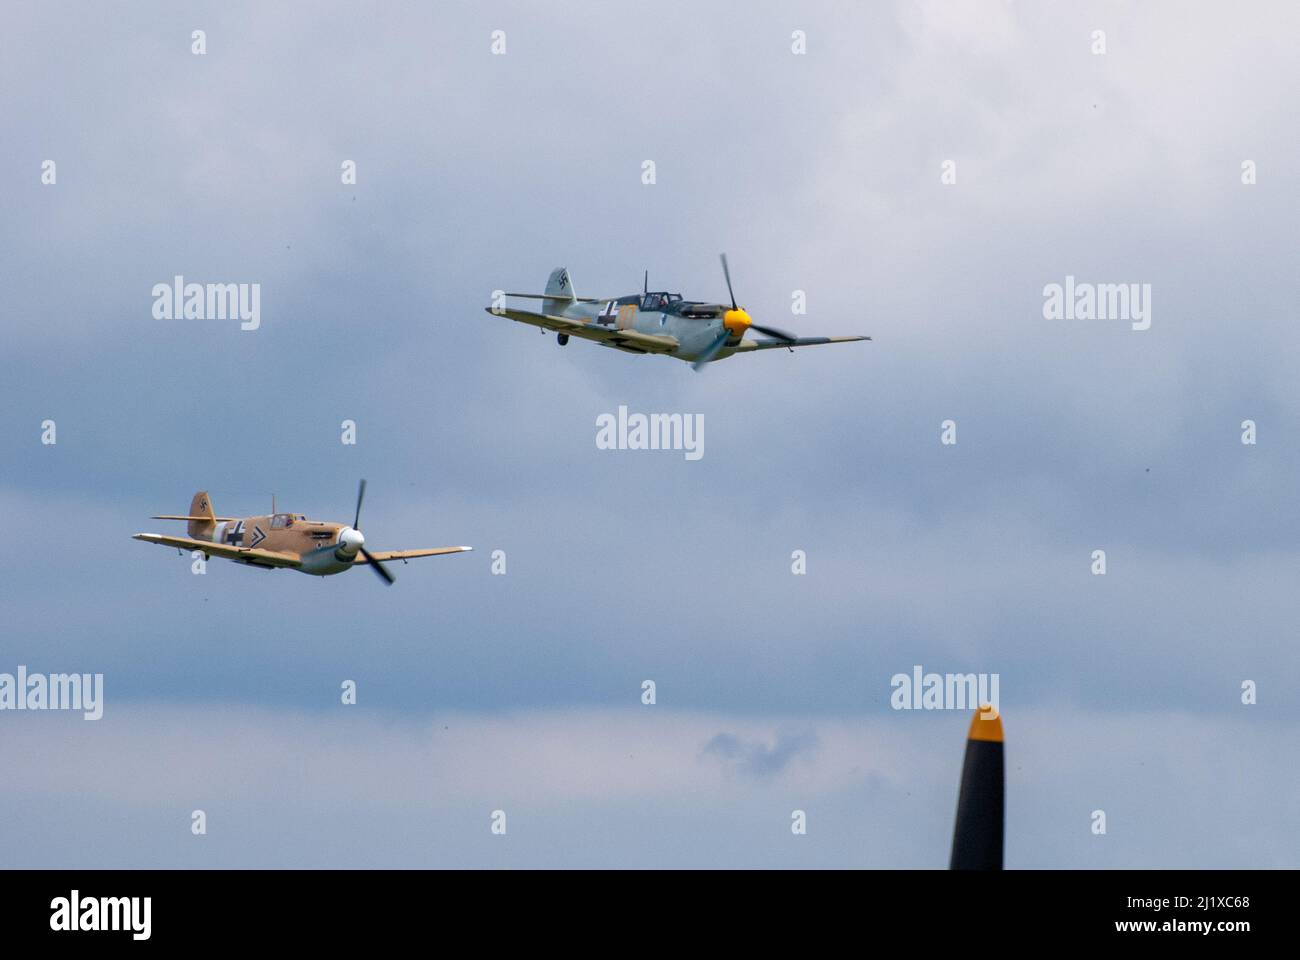 DUXFORD, CAMBRIDGESHIRE, UK - JULY 13, 2014: WW2 Bf (Messerschmitt) 109 carries out a dogfight display at Duxford airfield during Flying Legends Stock Photo